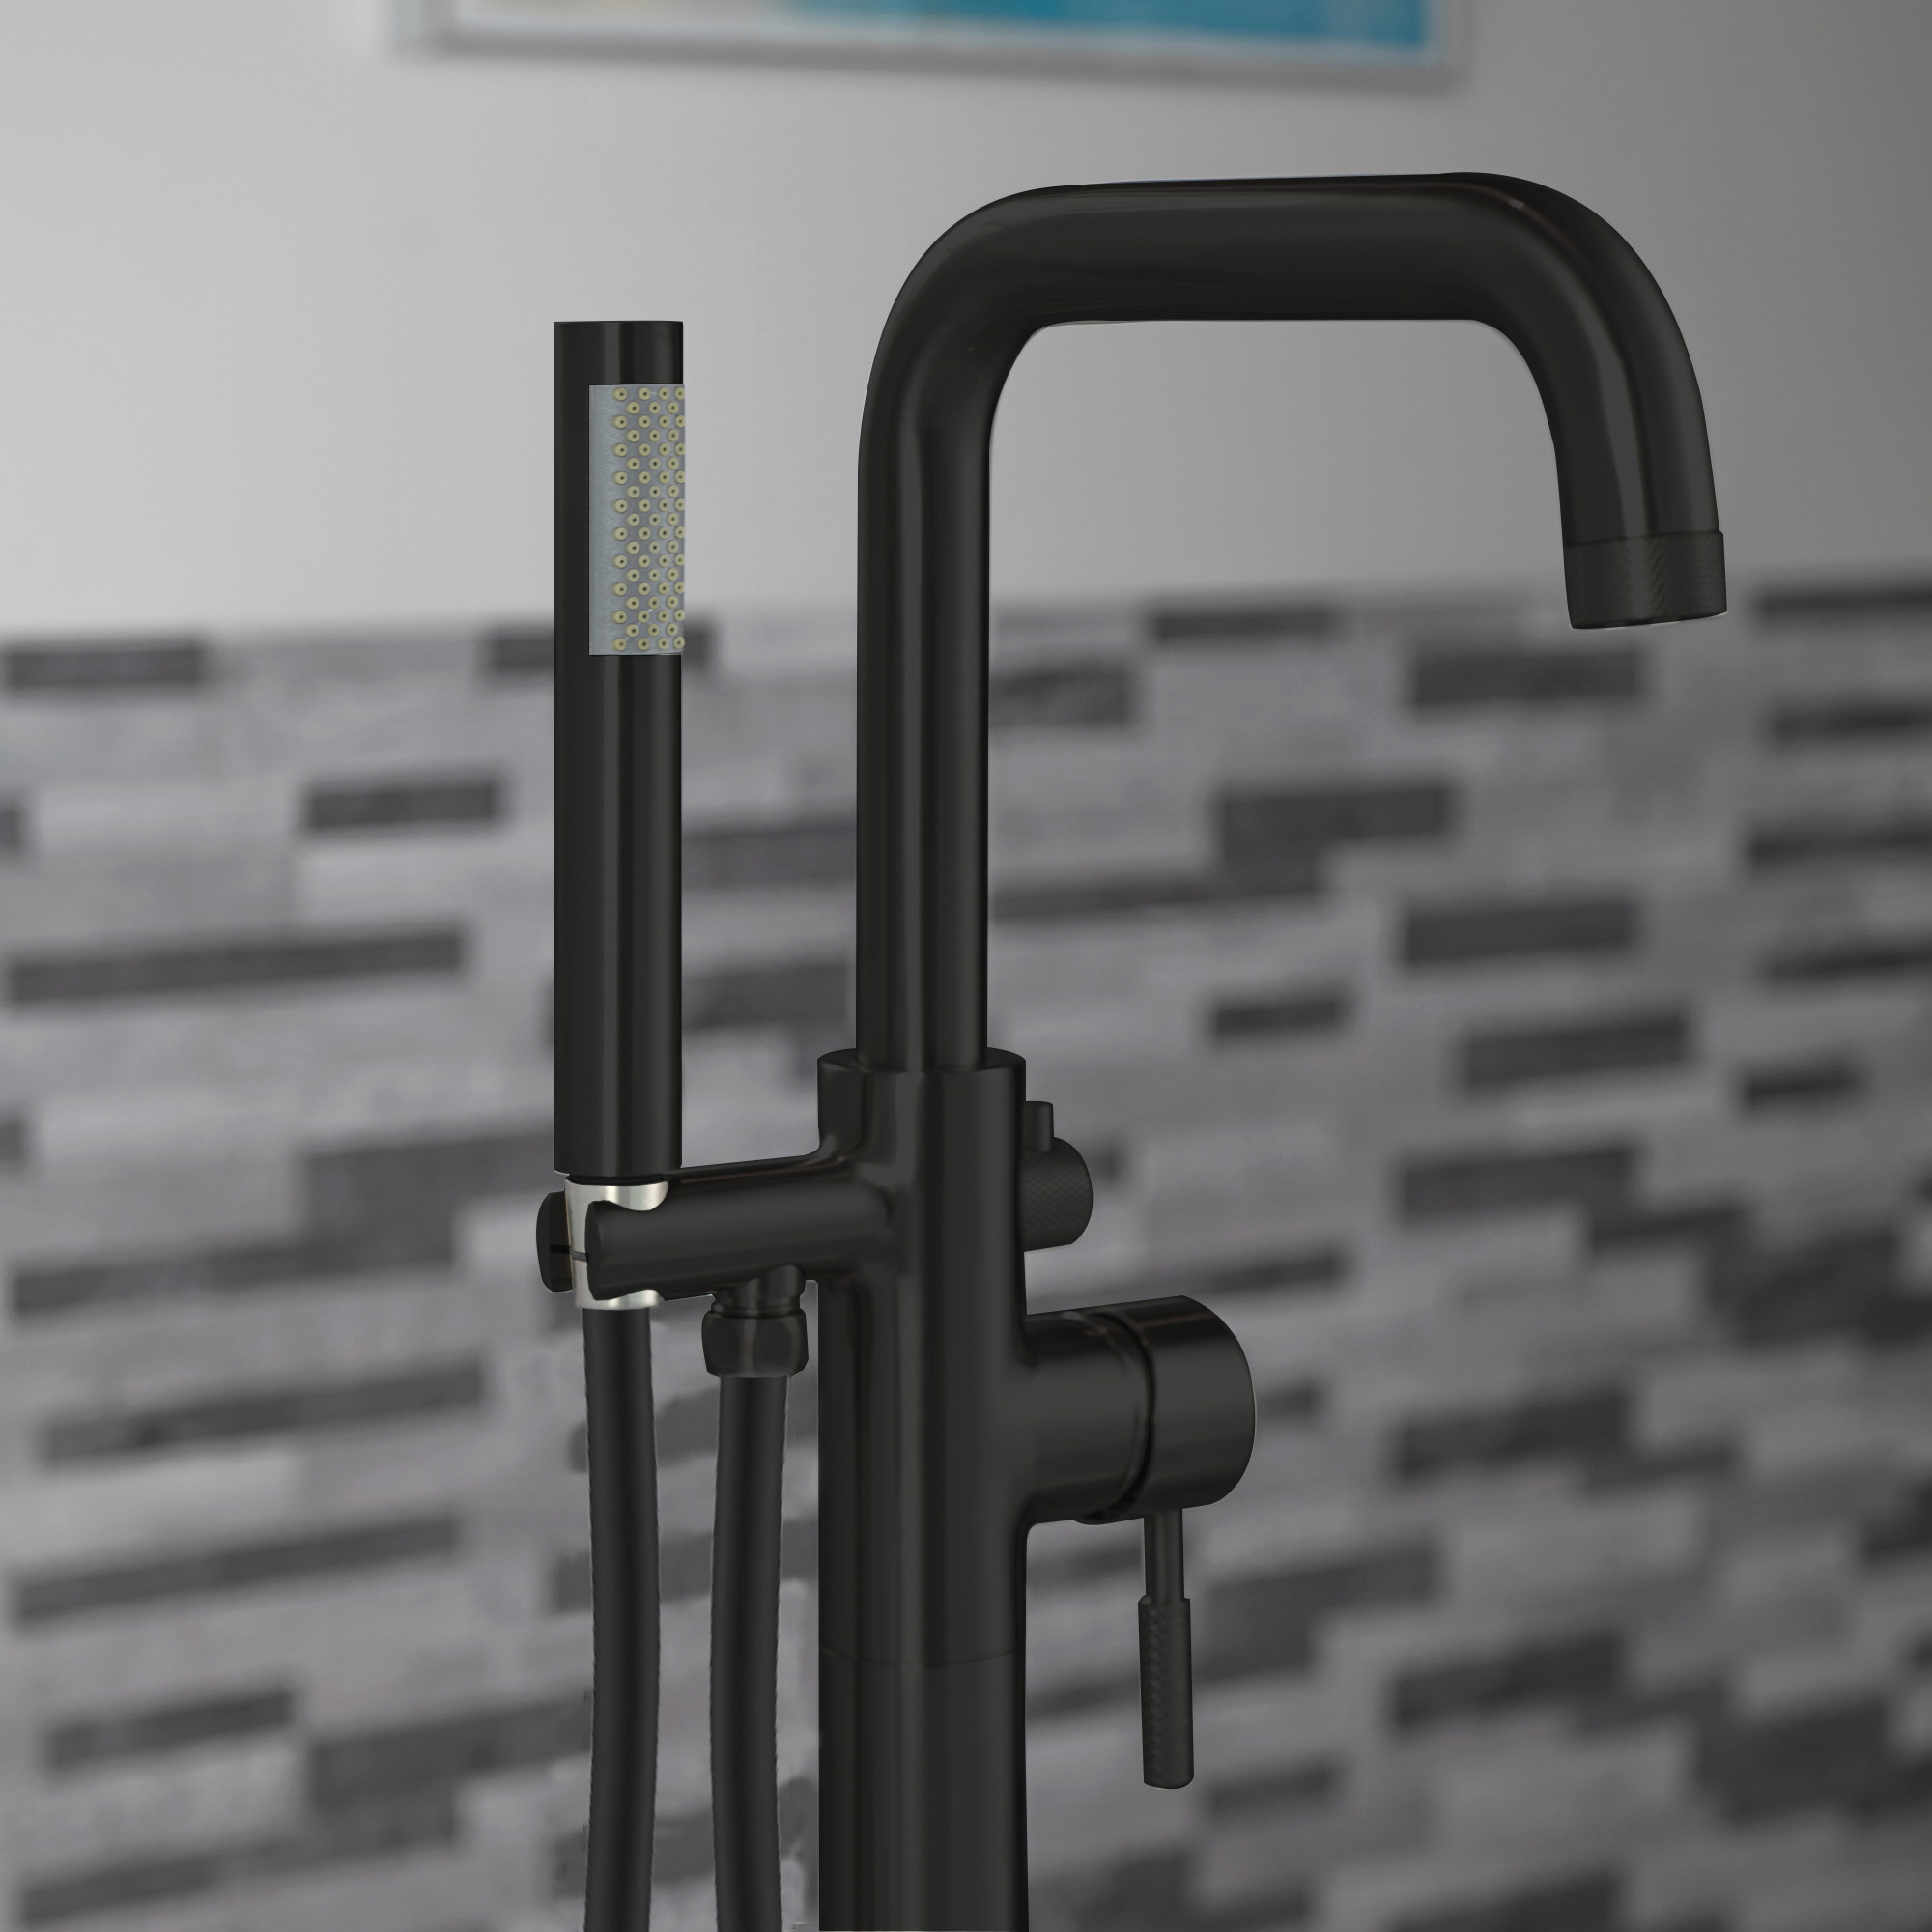  WOODBRIDGE F0072MBRD Contemporary Single Handle Floor Mount Freestanding Tub Filler Faucet with Cylinder Style Hand Shower in Matte Black Finish._15151